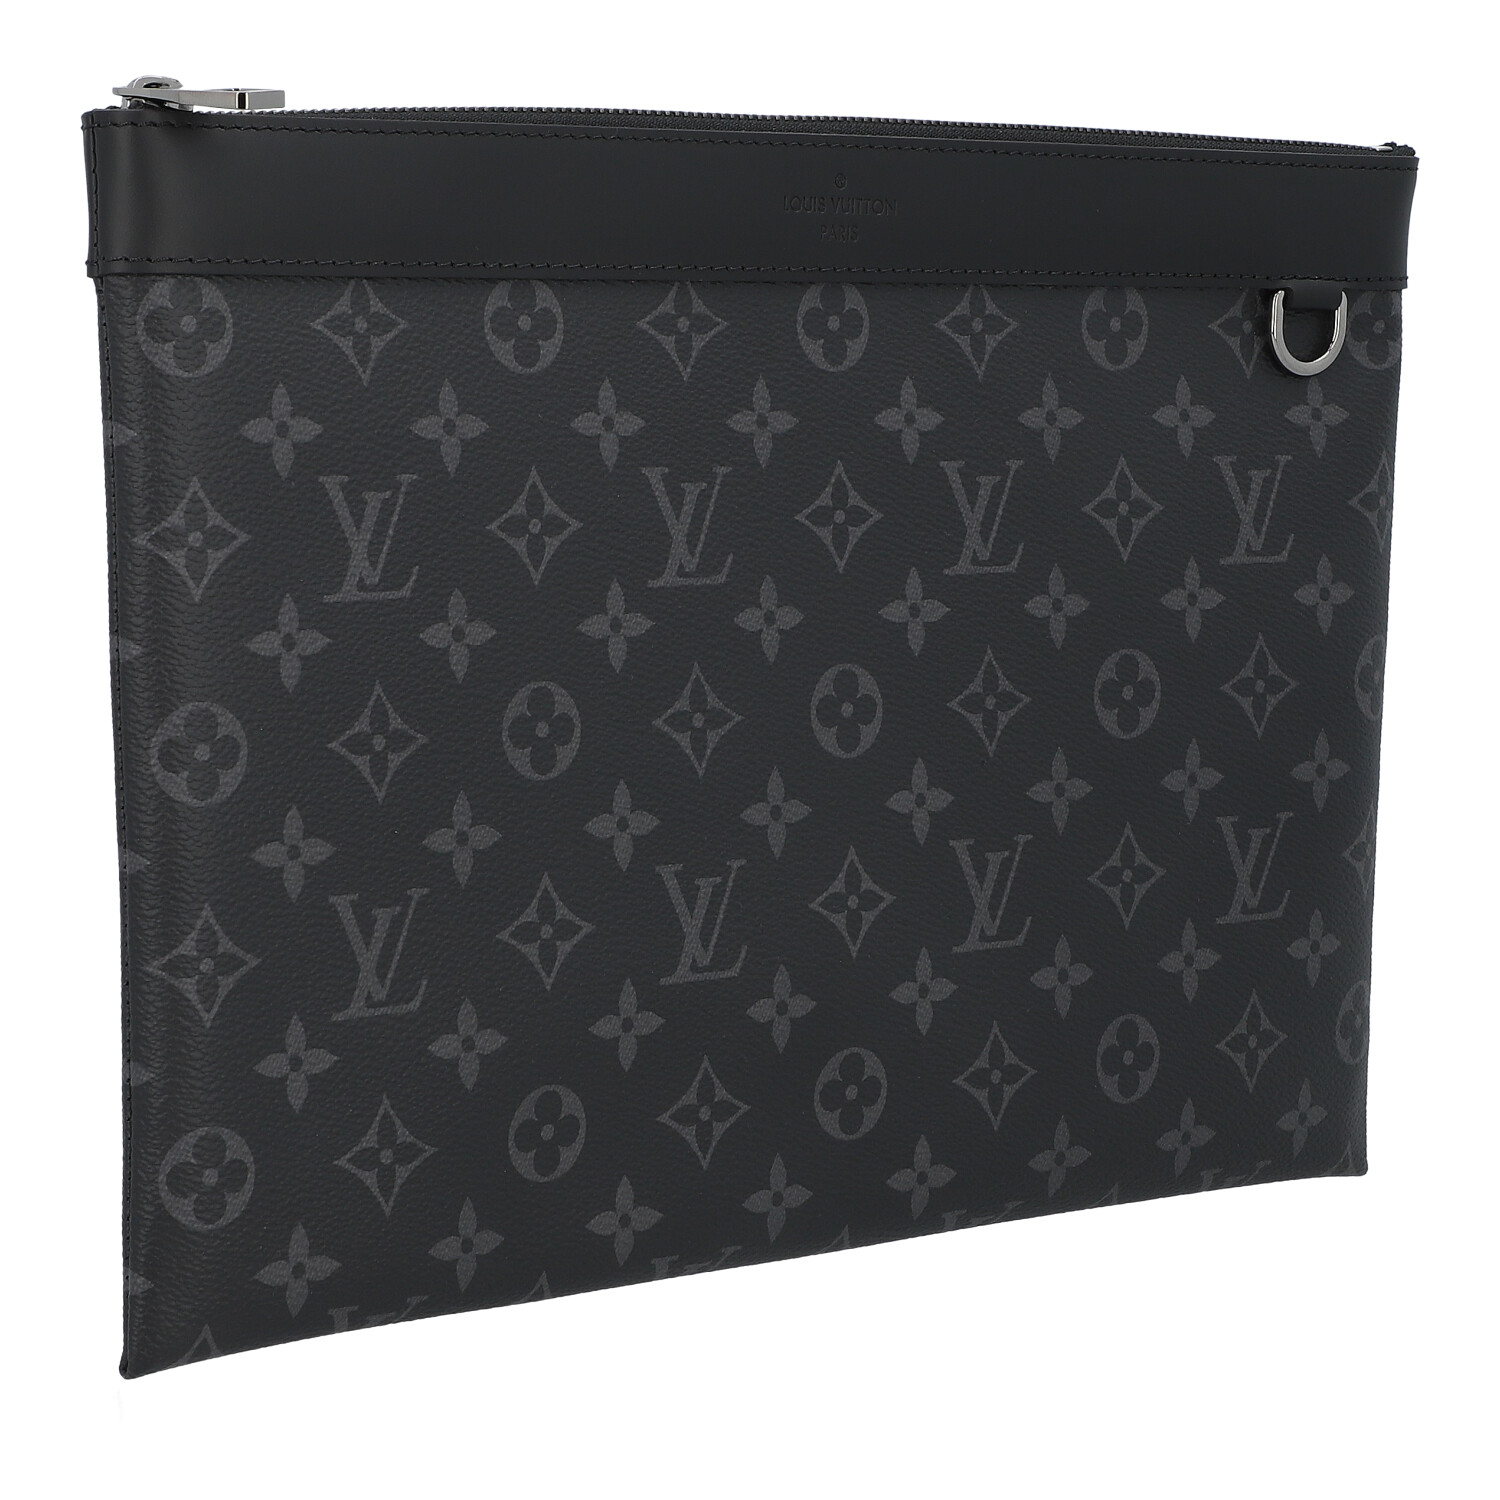 LOUIS VUITTON Pochette "DISCOVERY". - Image 2 of 6